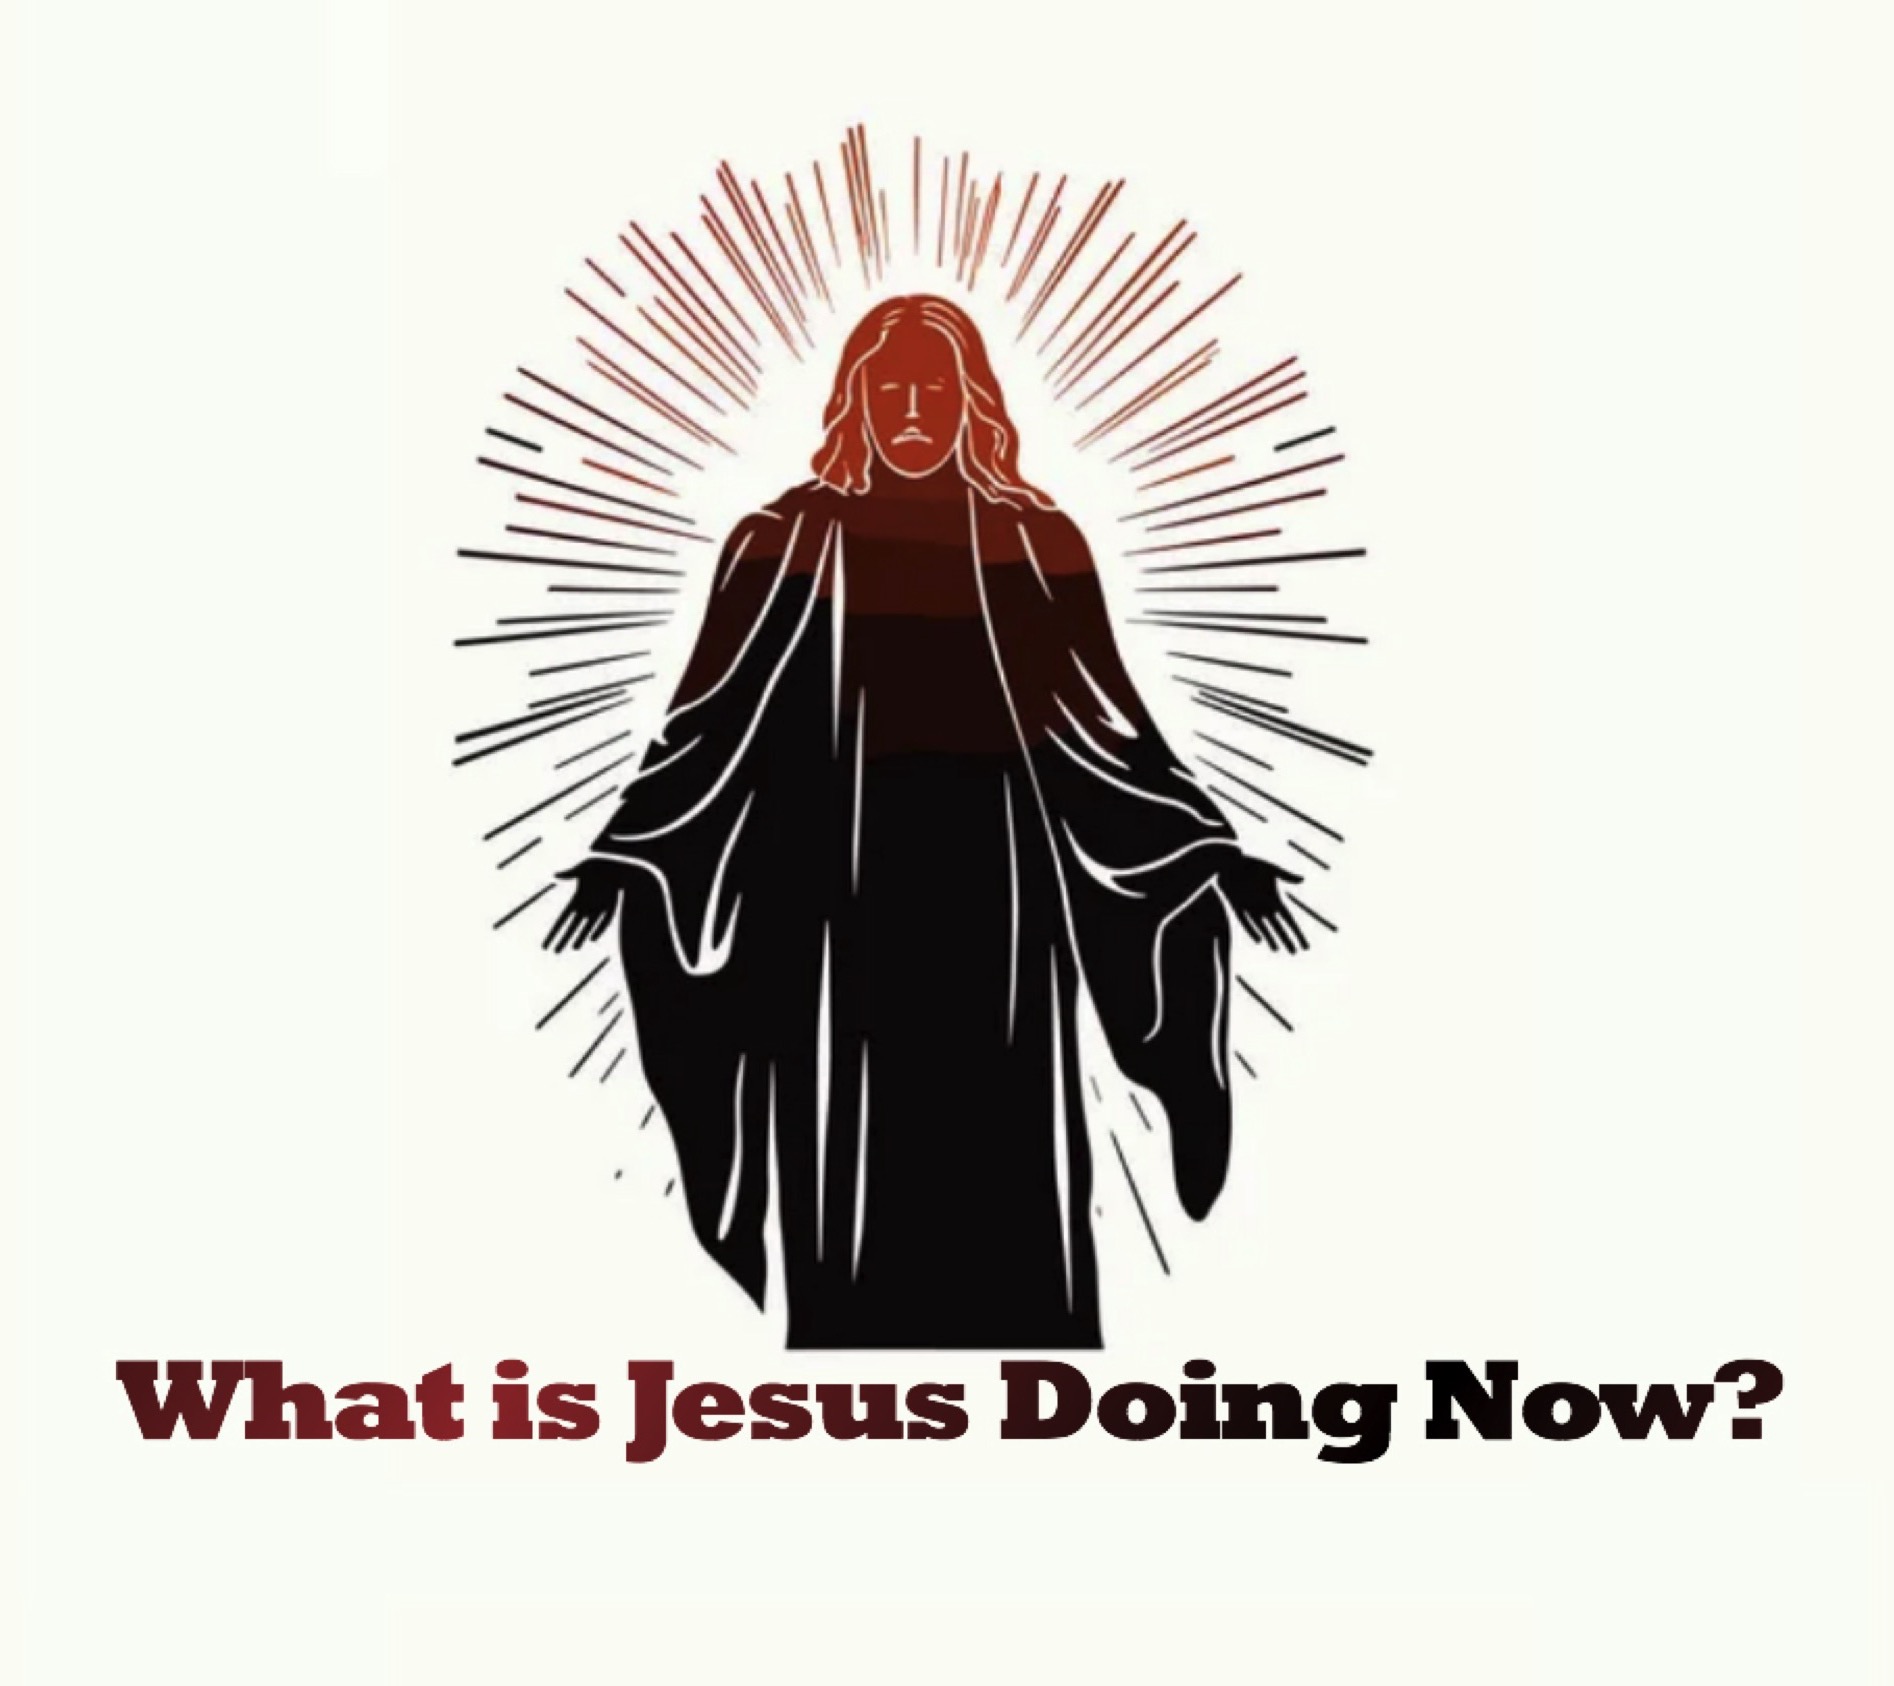 Paul Pitts - "What is Jesus Doing Now?"